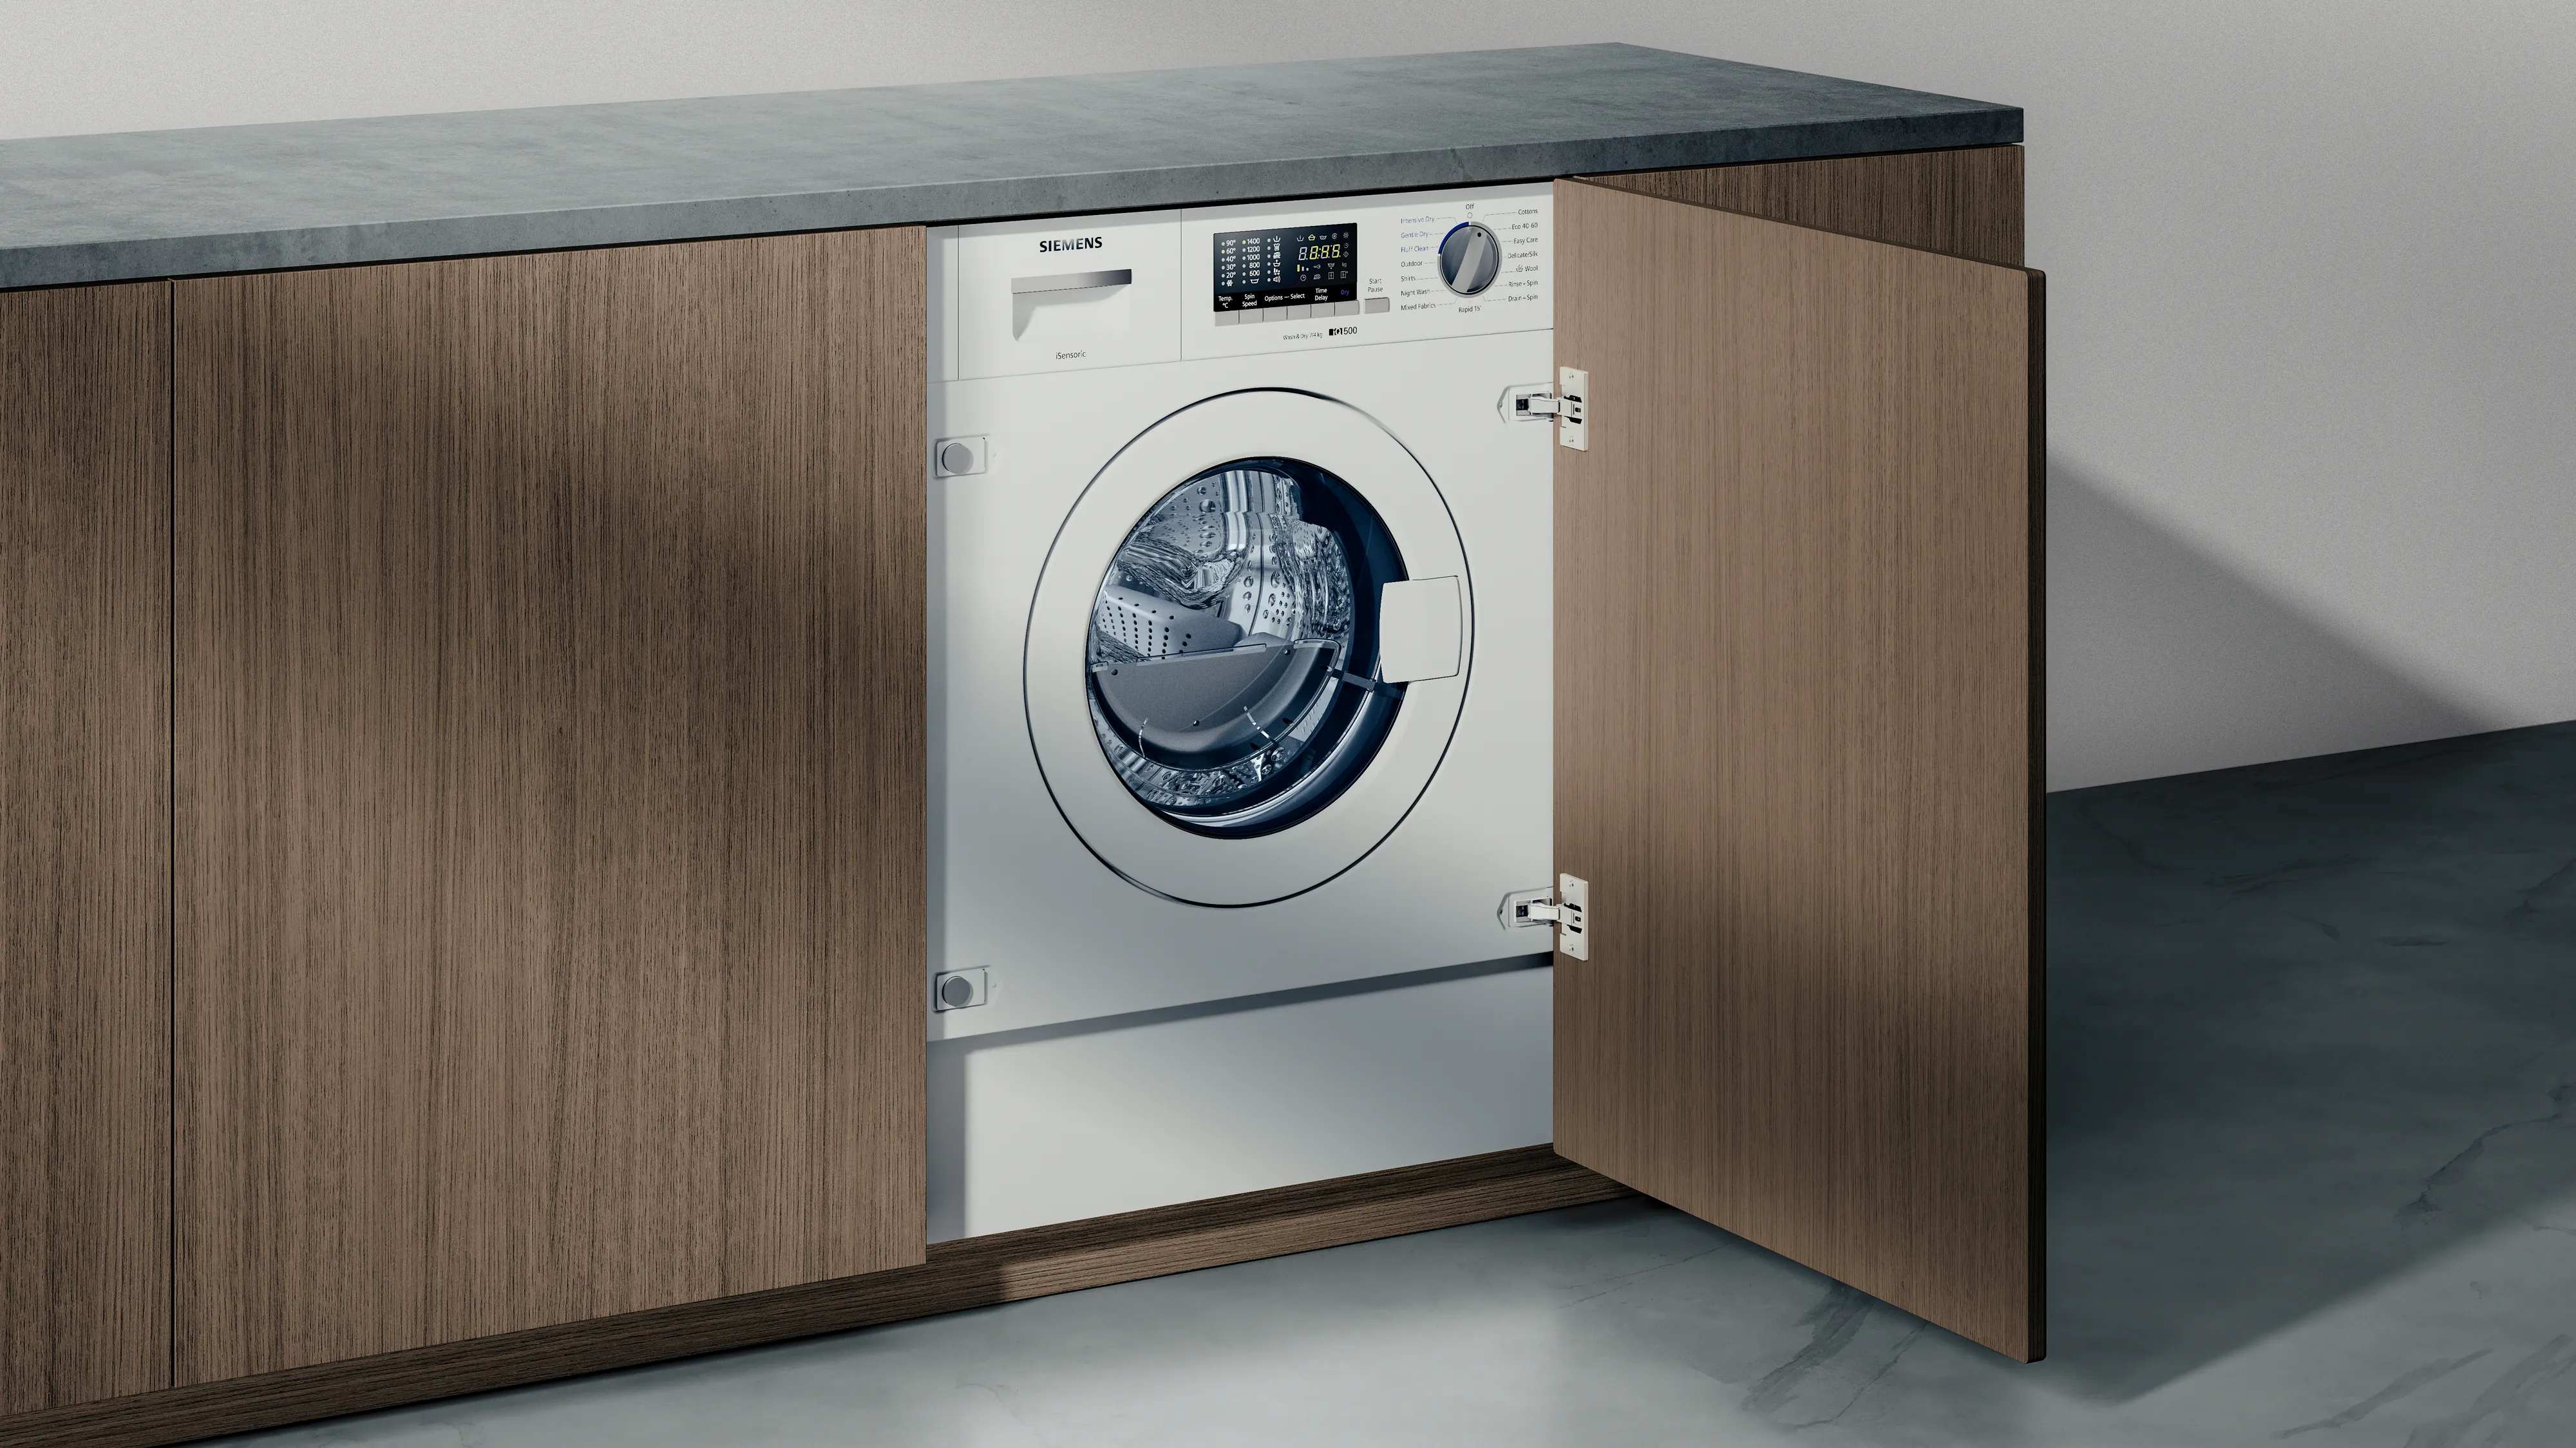 Built-in wash dryers